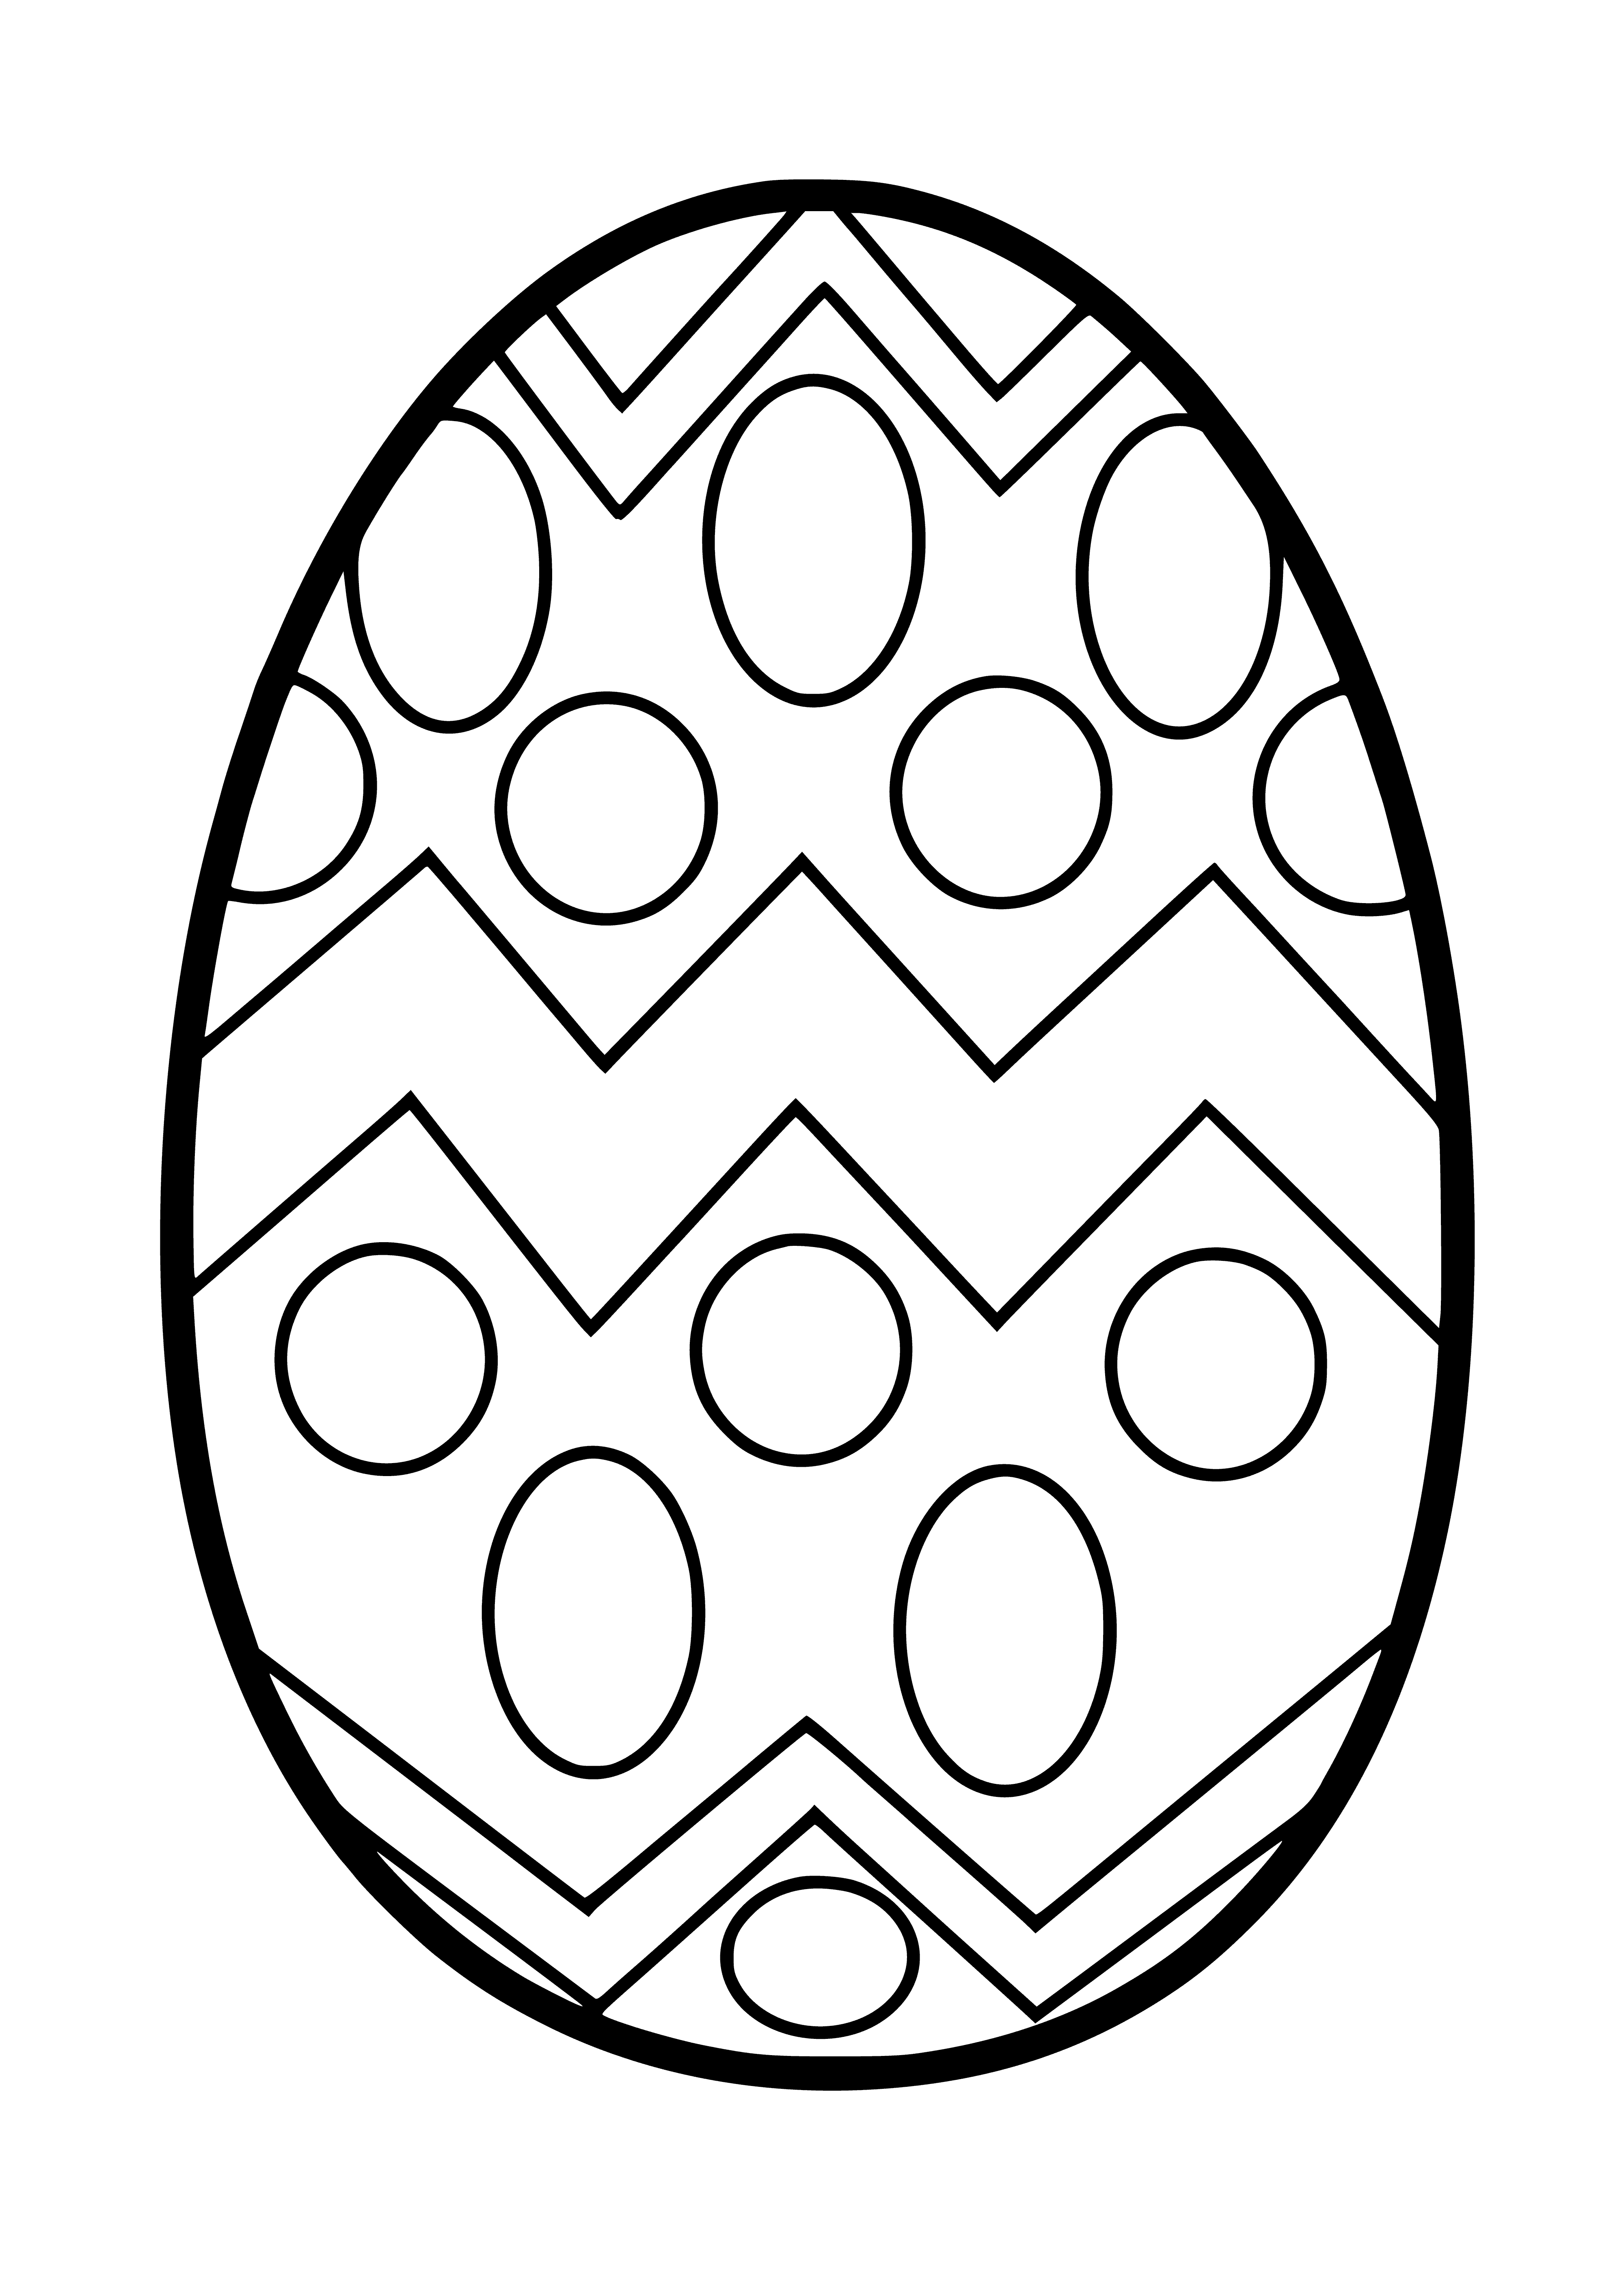 coloring page: Light brown bunny with long ears painted on a round pale egg, surrounded by green leaves.